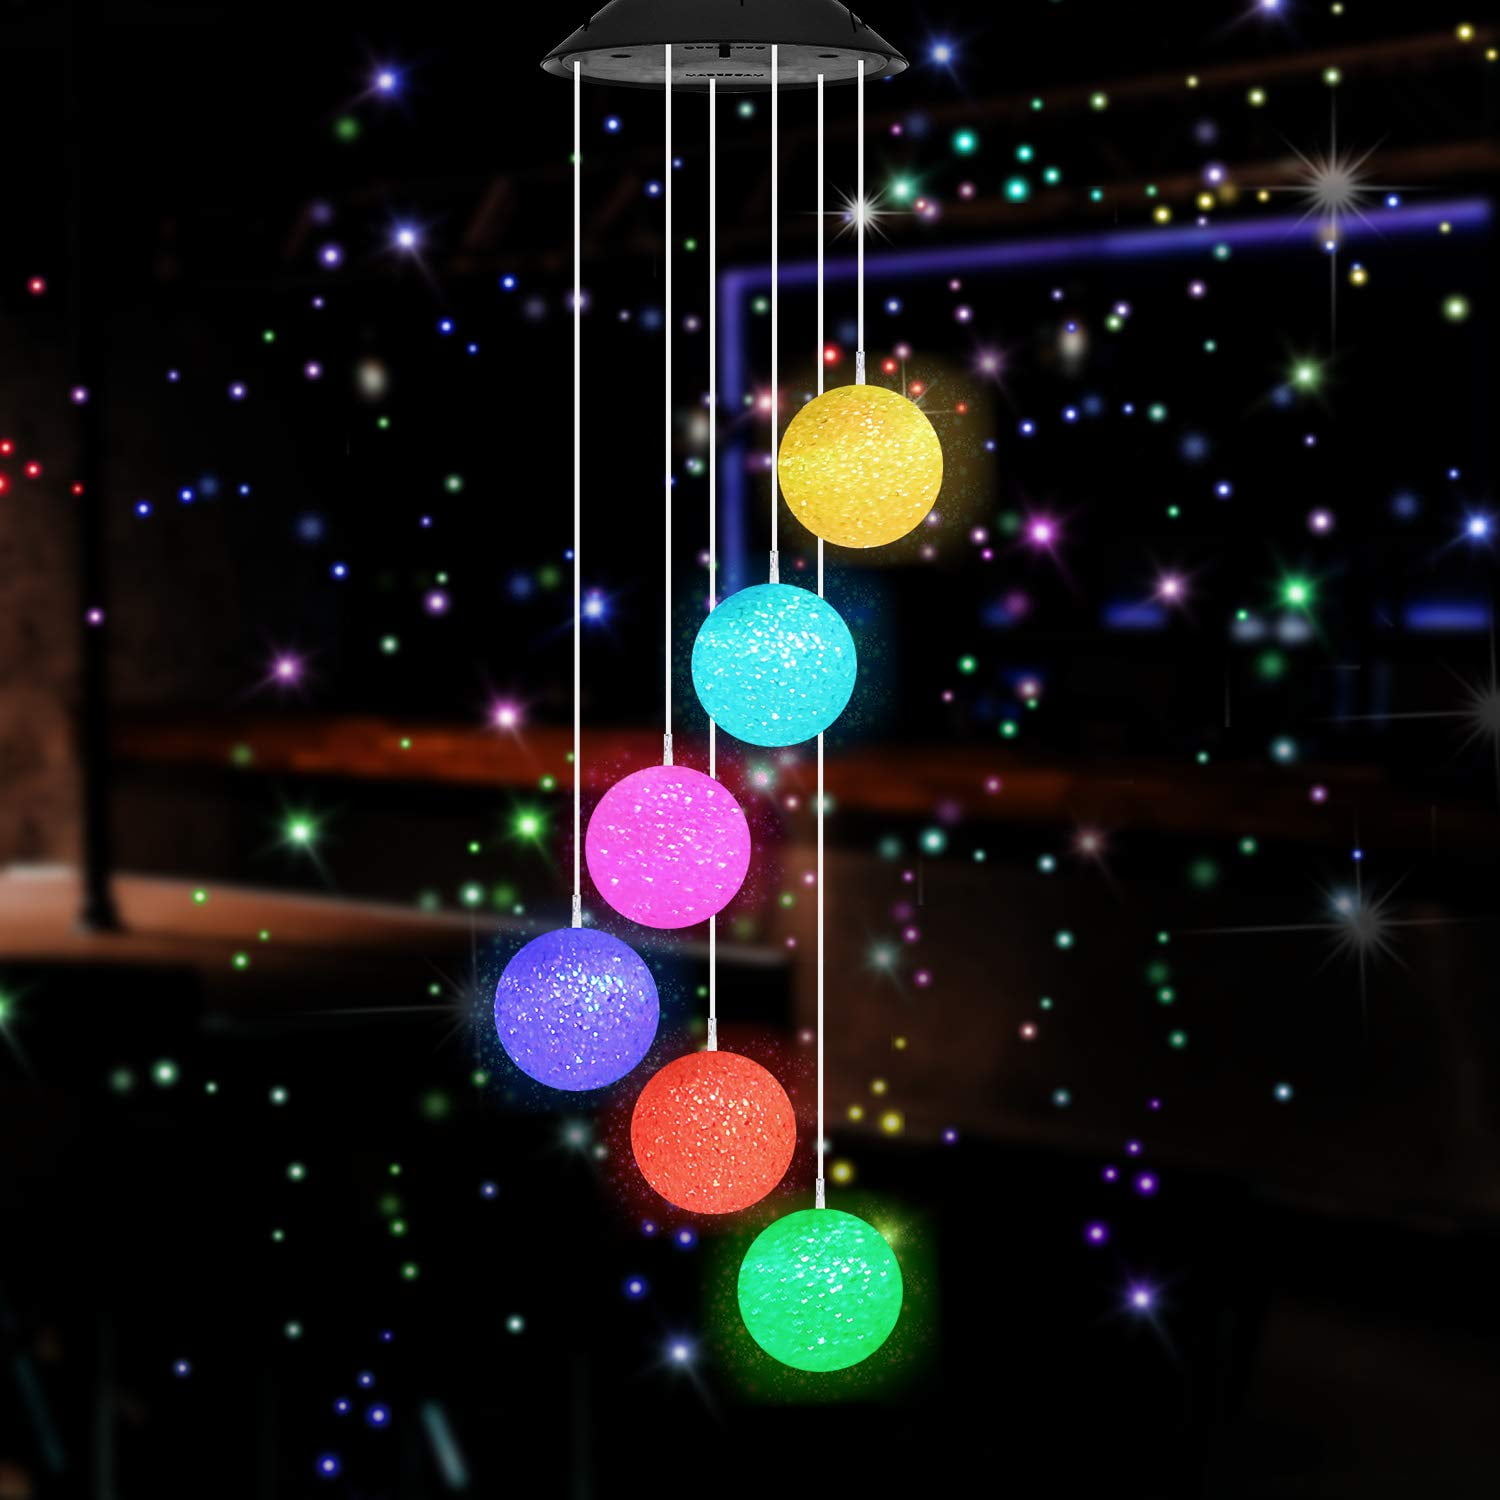 Details about   Solar Color Changing LED Wind Chime Garden Yard Hanging Light Decor Walkway Lamp 